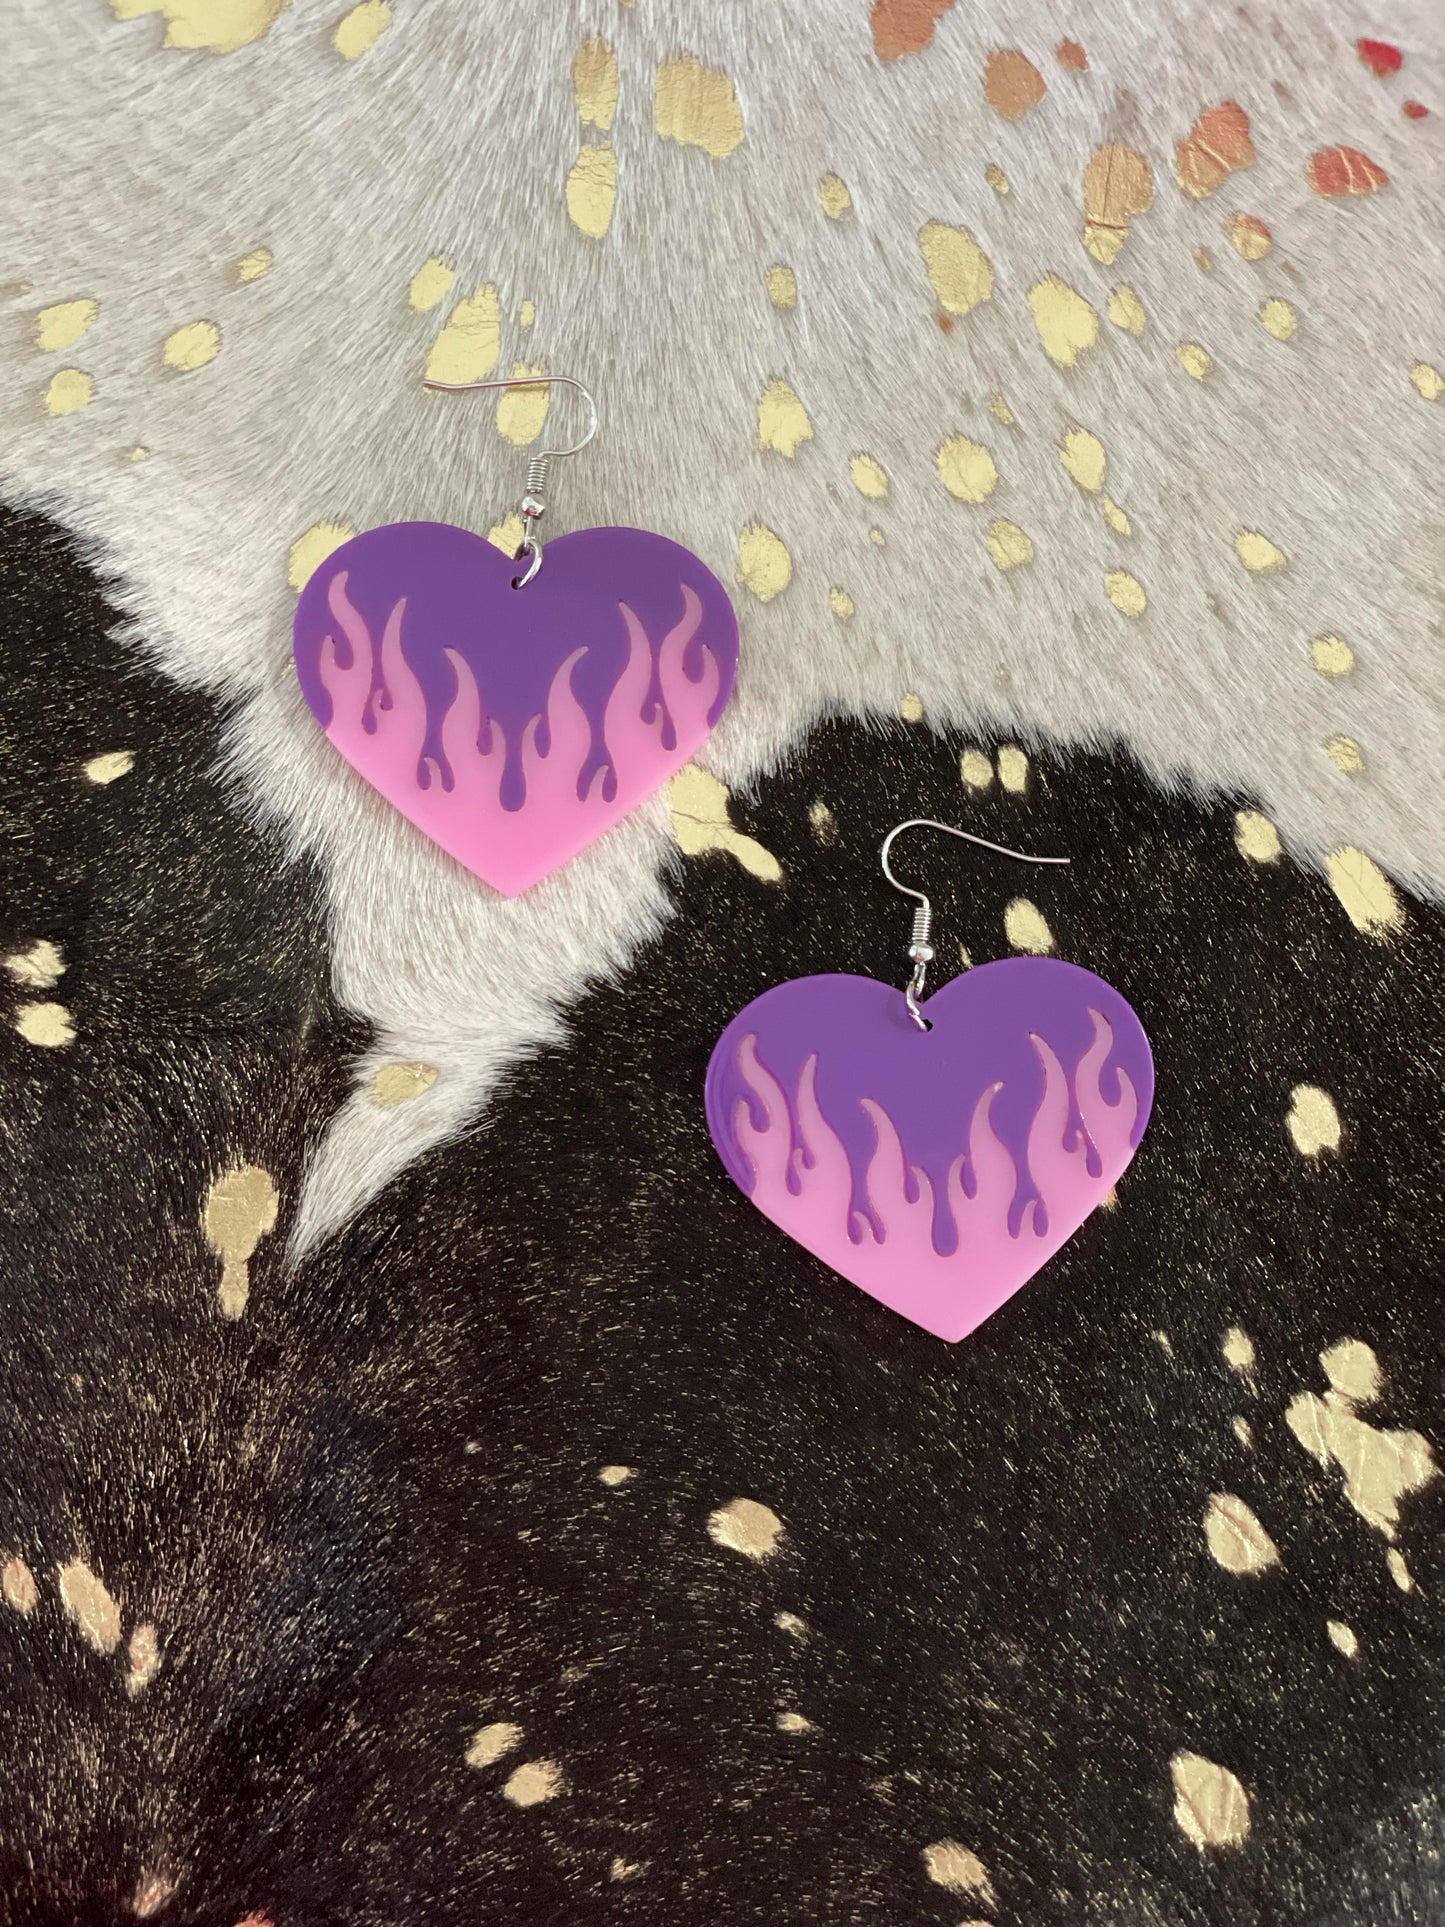 Big purple heart dangly earrings with pink flames.